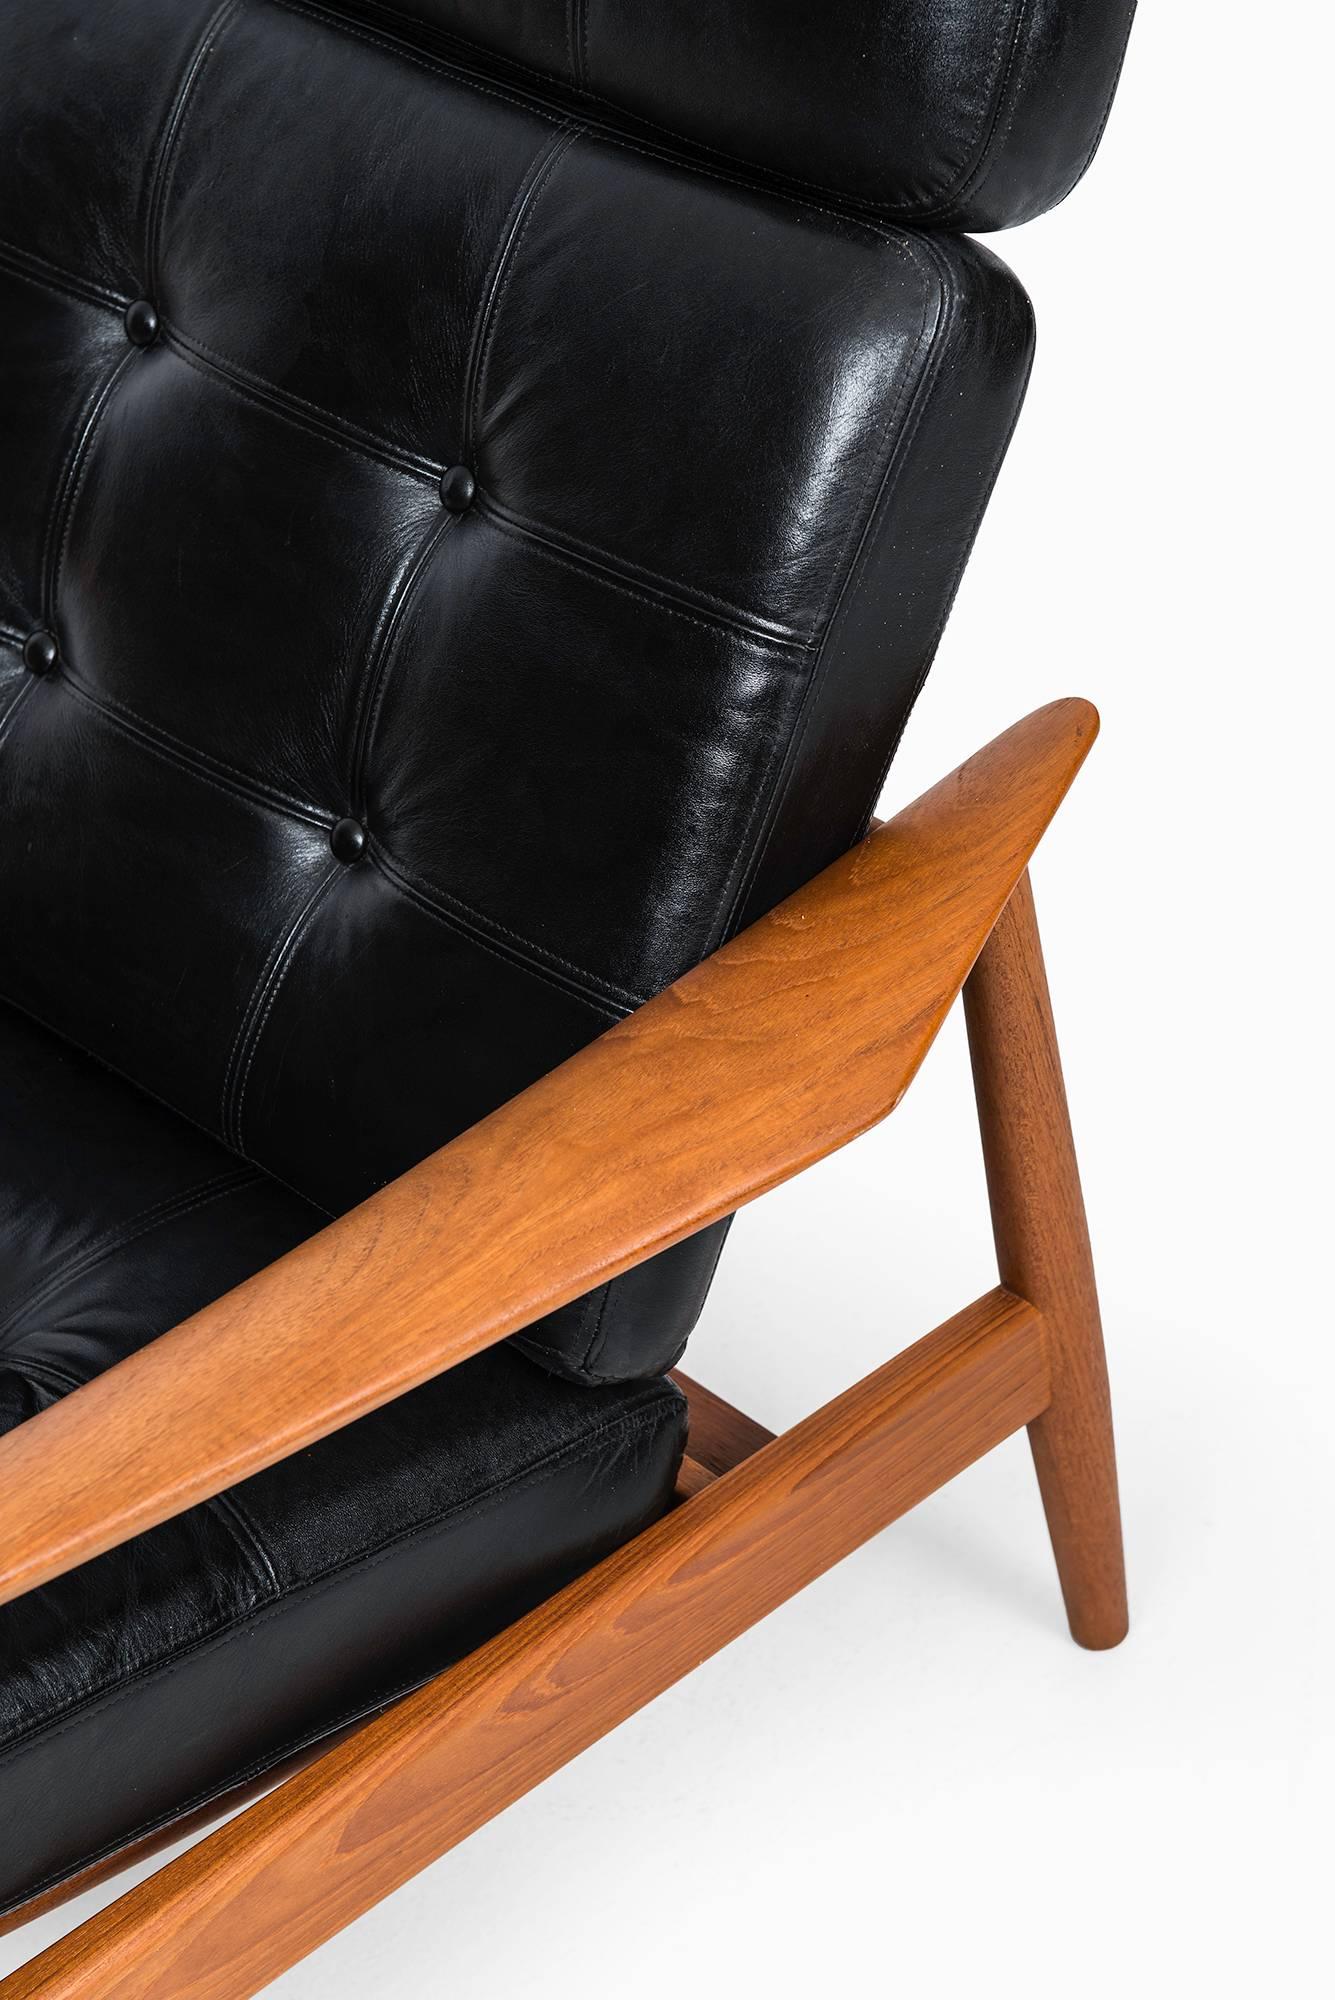 Rare reclining chair model FD-164 designed by Arne Vodder. Produced by Cado in Denmark.